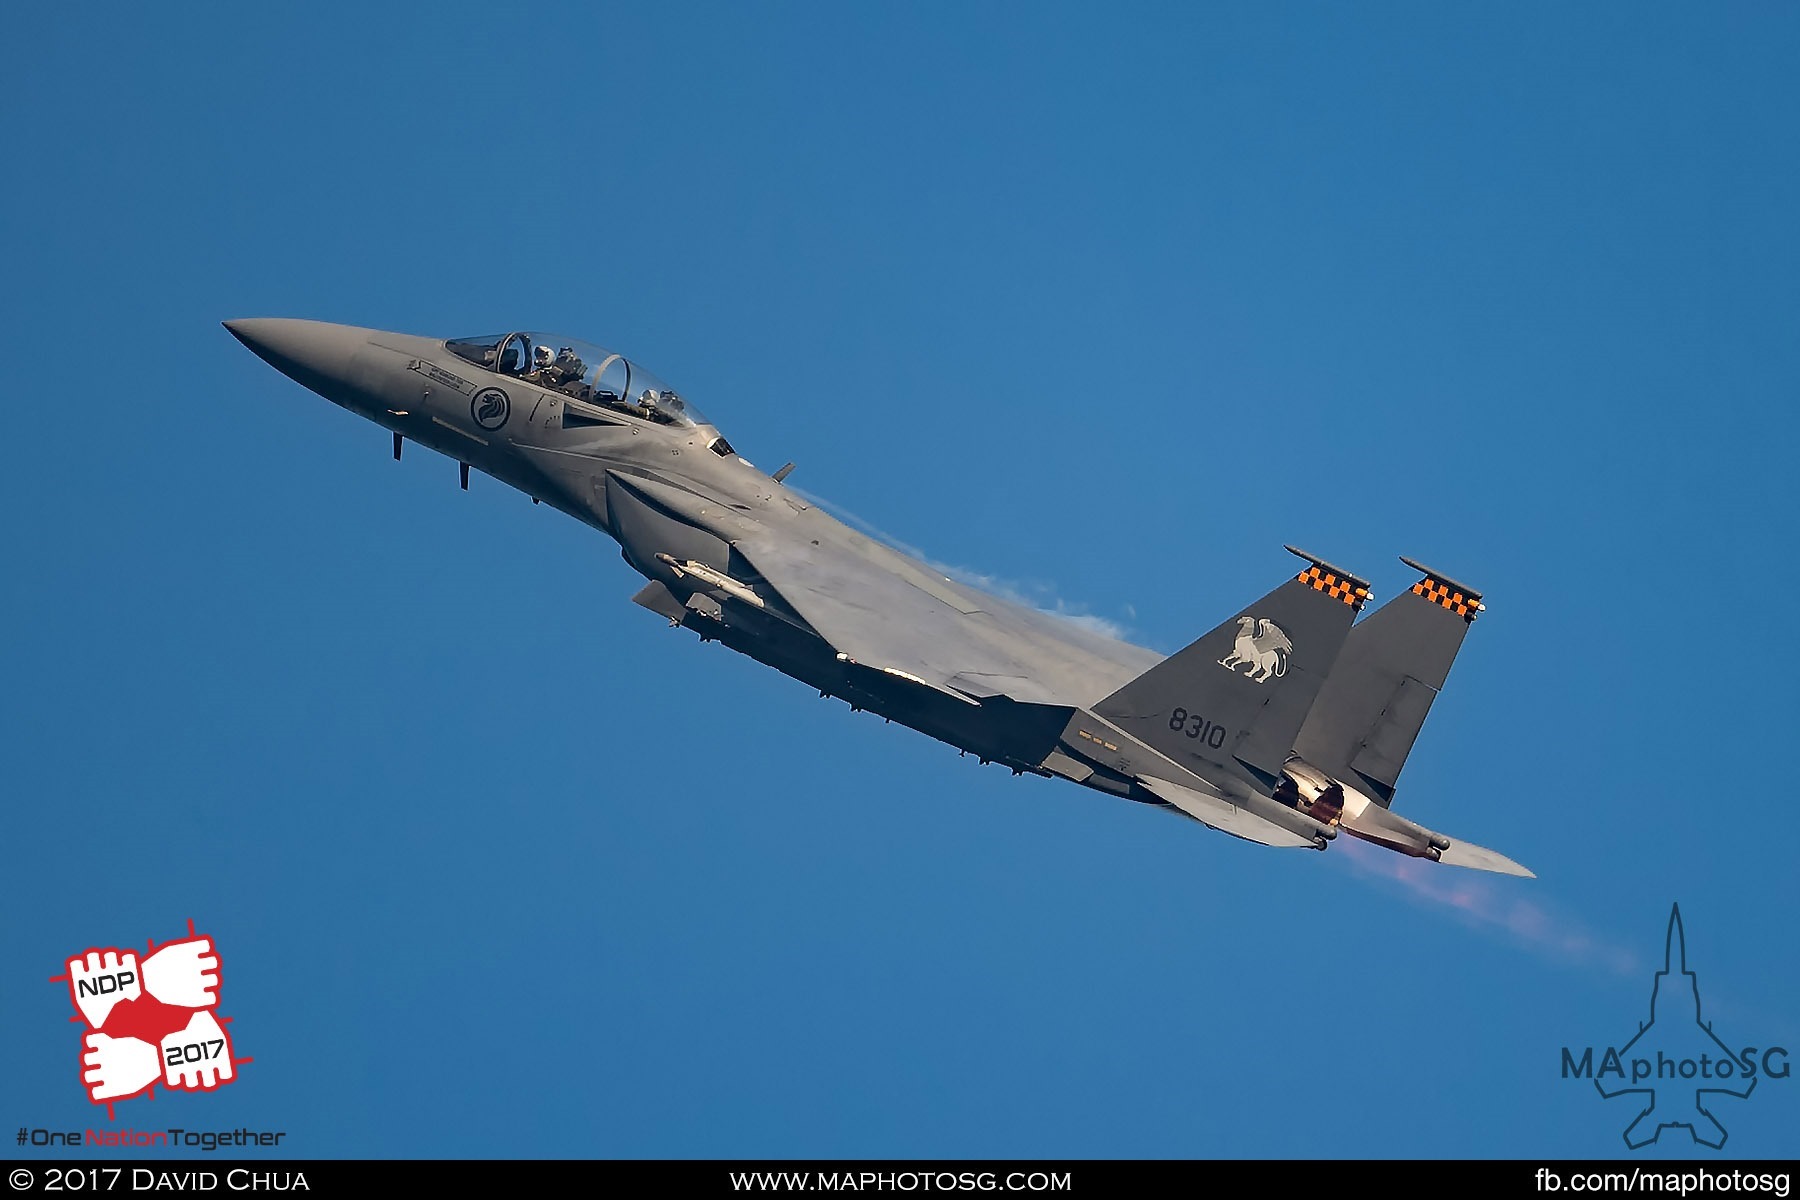 7. A F-15SG Strike Eagle from 142 Squadron exits the show in full afterburners after it’s performance.